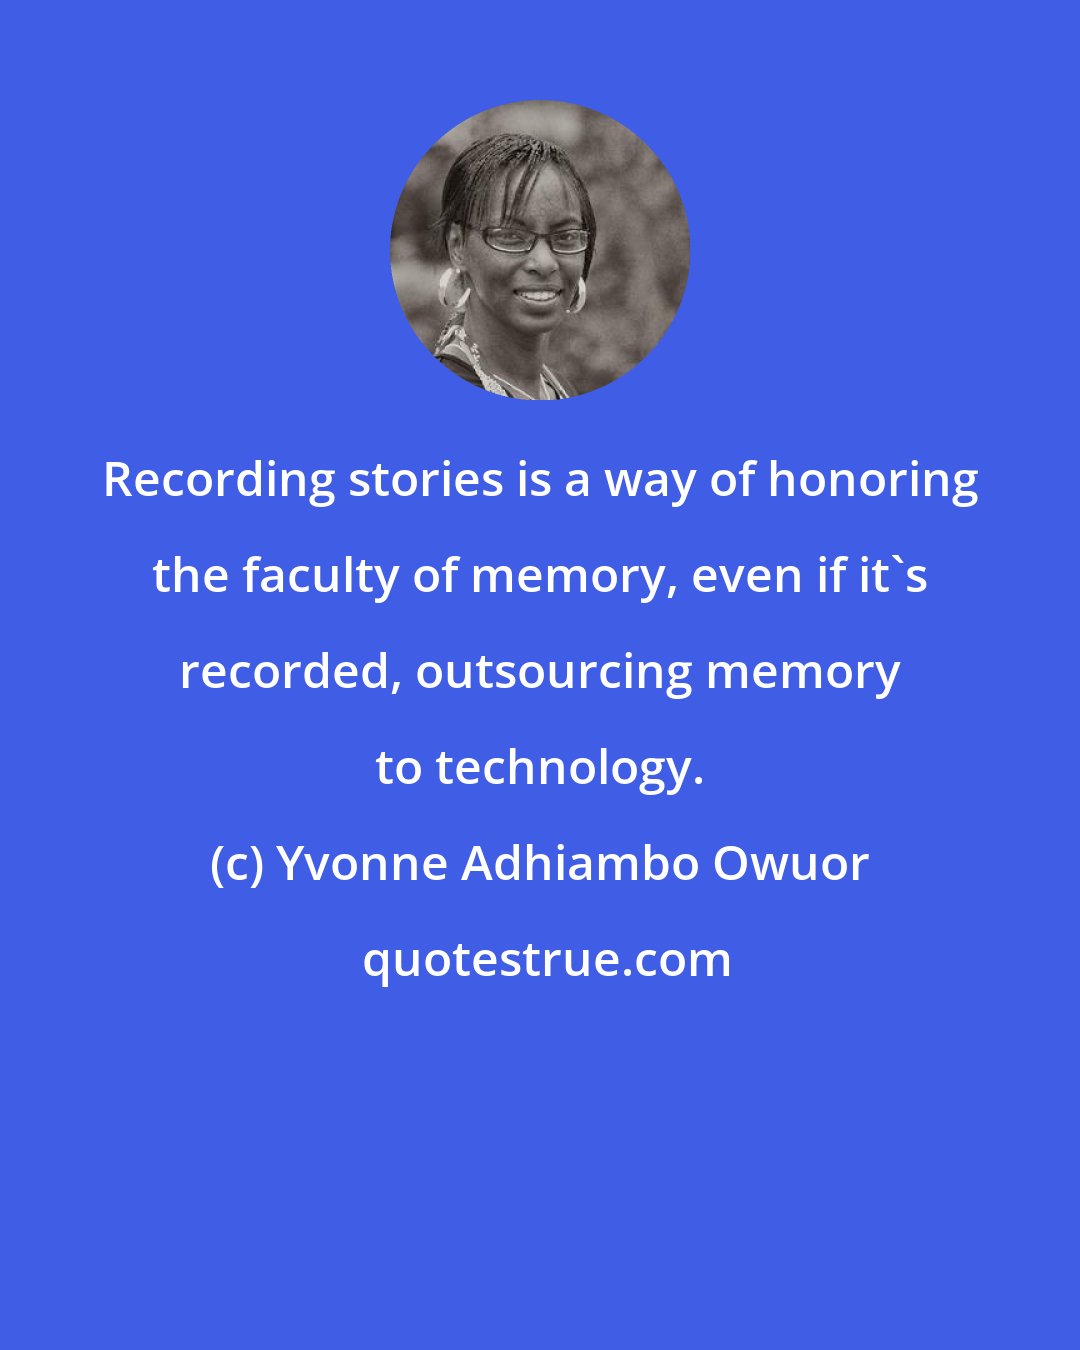 Yvonne Adhiambo Owuor: Recording stories is a way of honoring the faculty of memory, even if it's recorded, outsourcing memory to technology.